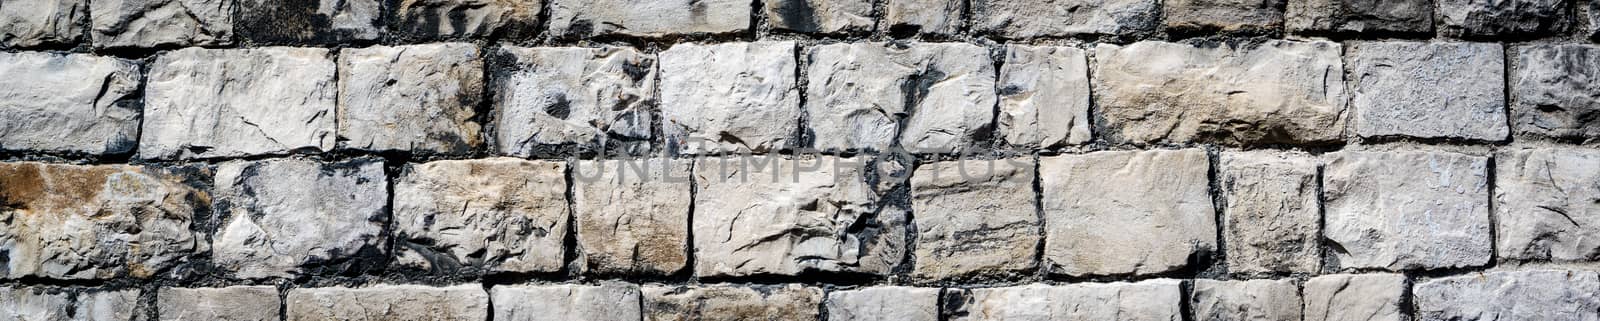 panorama of a cracked real stone wall surface by paddythegolfer